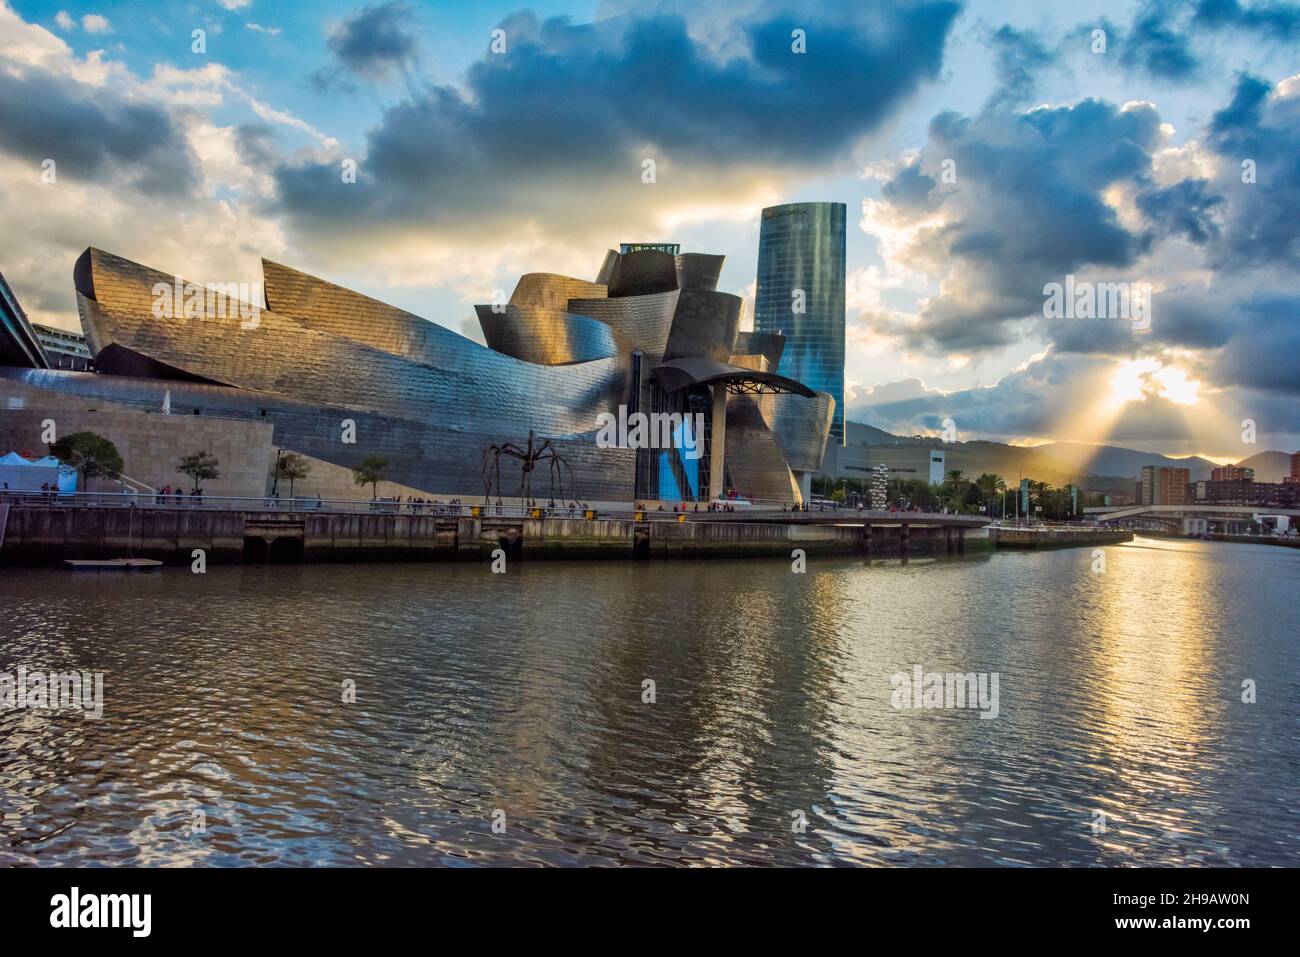 Guggenheim Museum Bilbao and high rise by Nervion River, Bilbao, Biscay Province, Basque County Autonomous Community, Spain Stock Photo